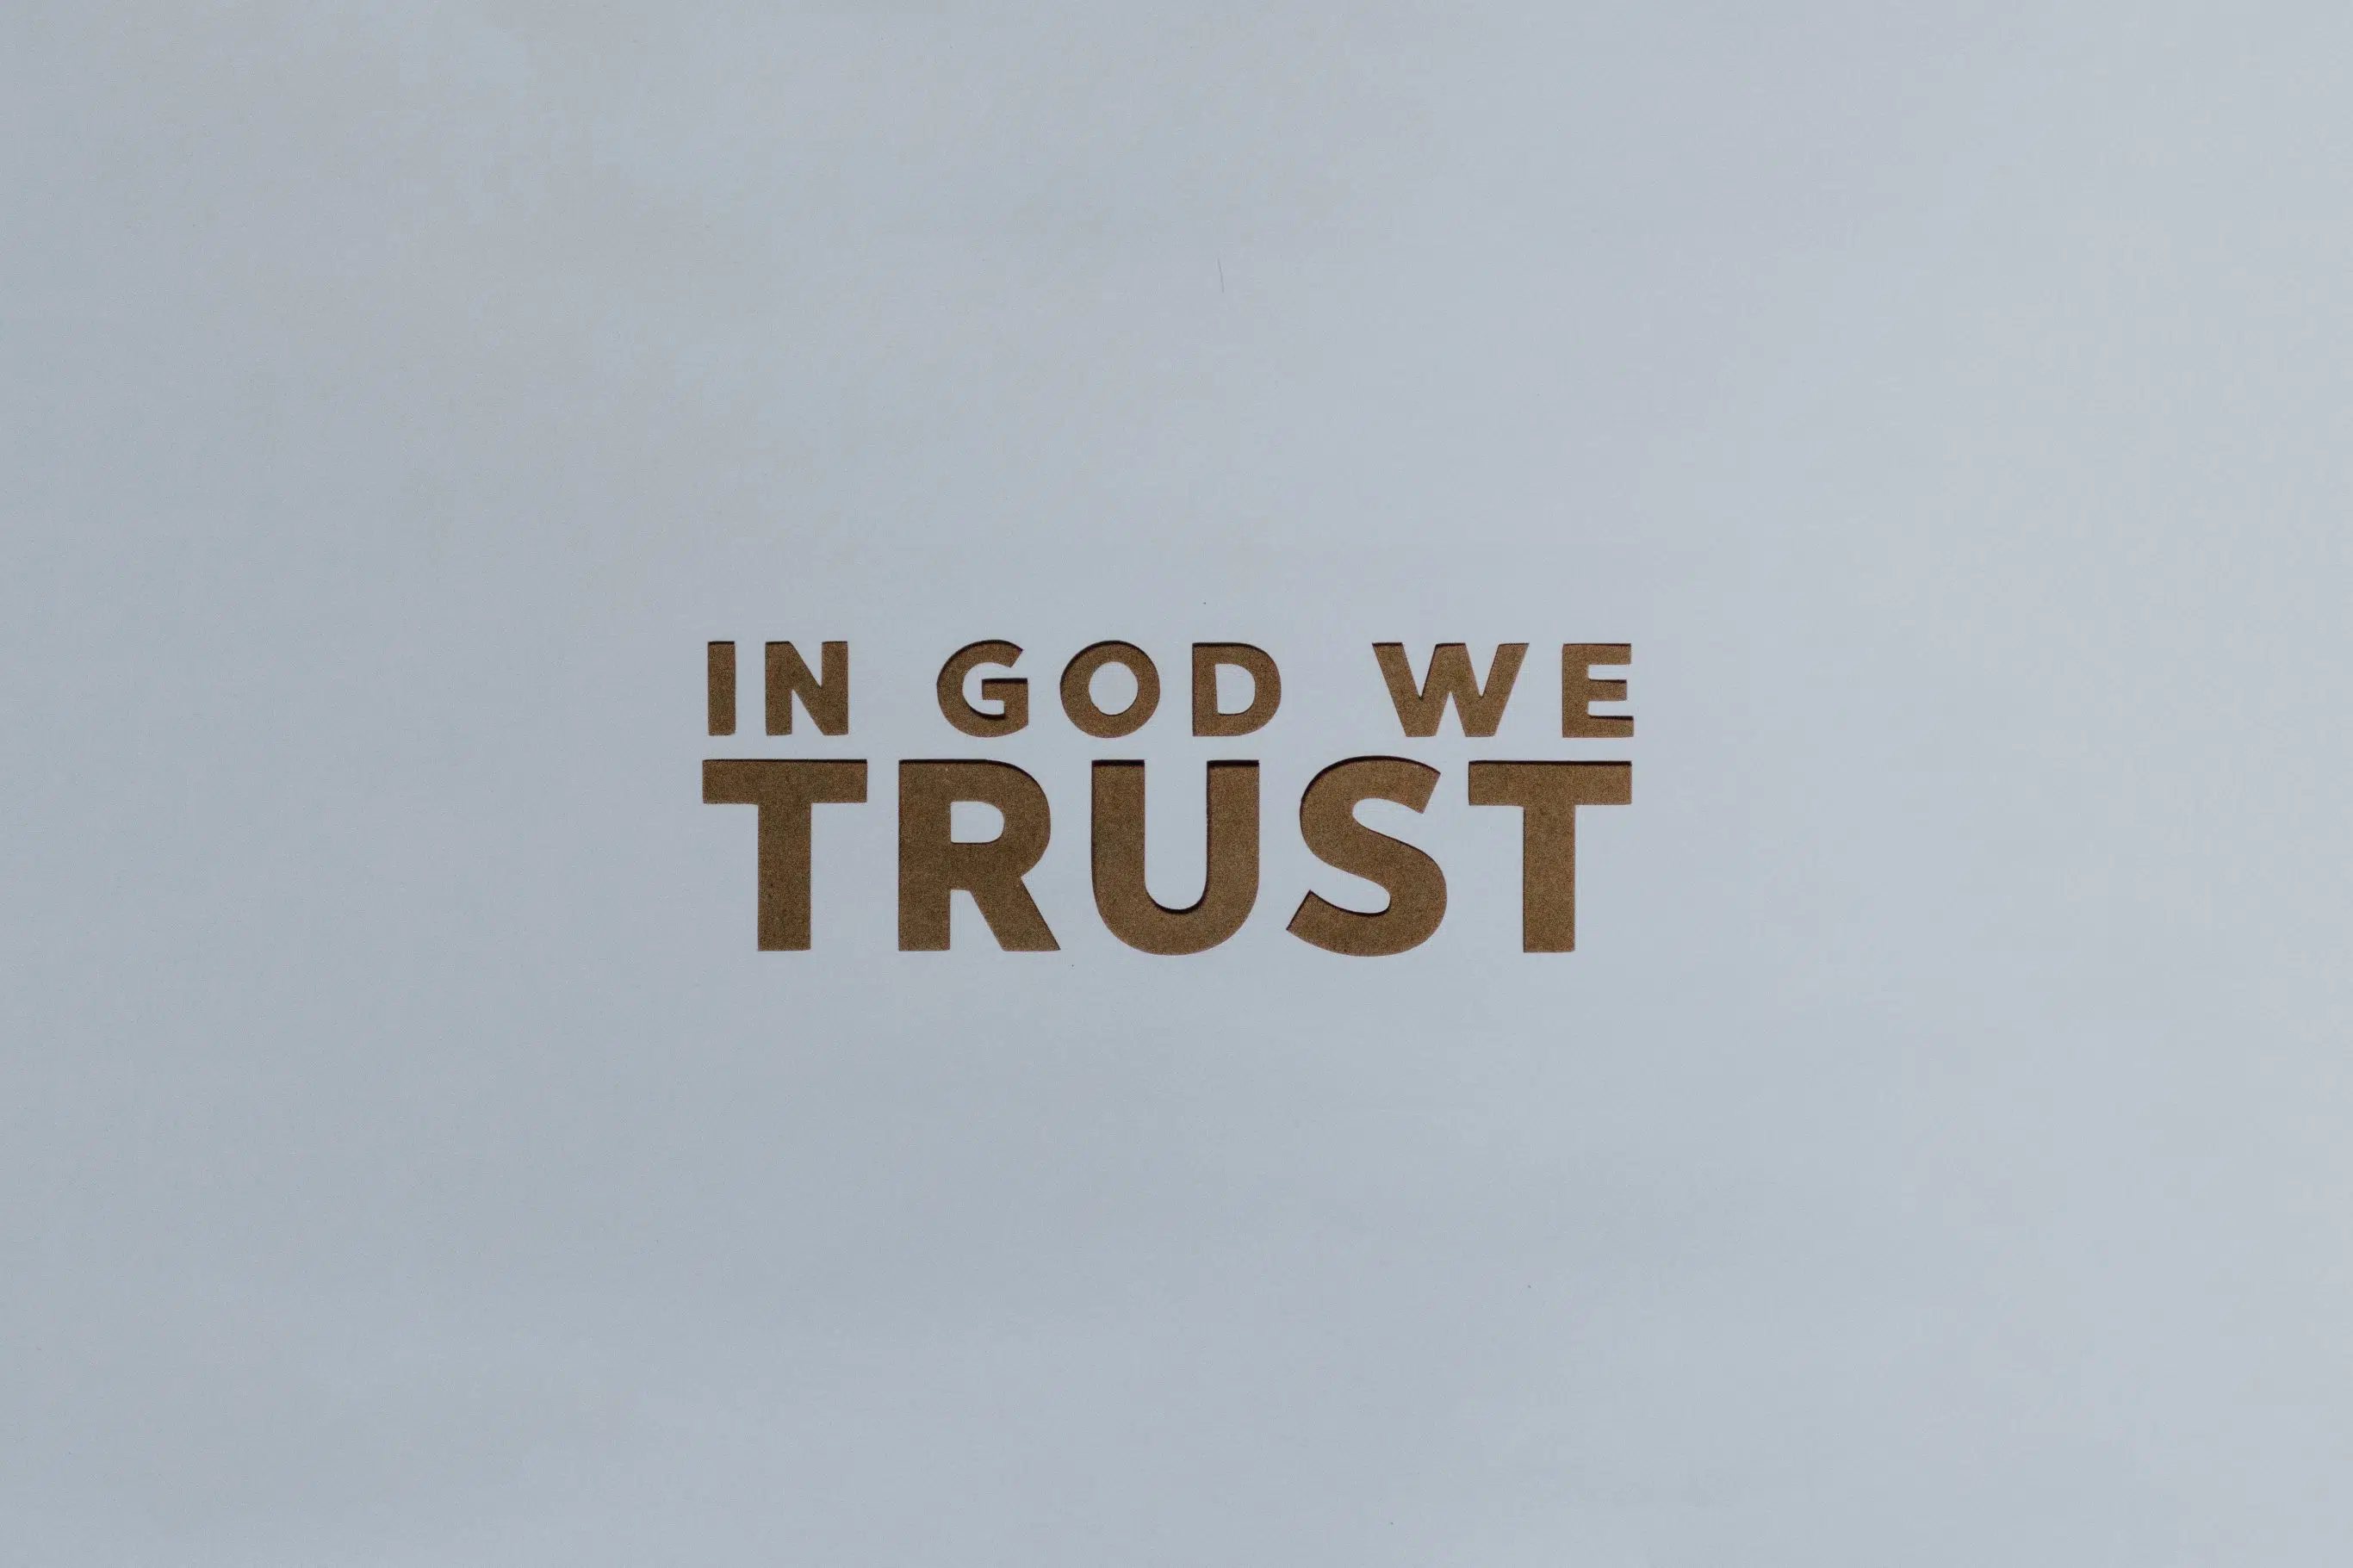 House approves bill to display national motto "In God We Trust" in every Louisiana classroom